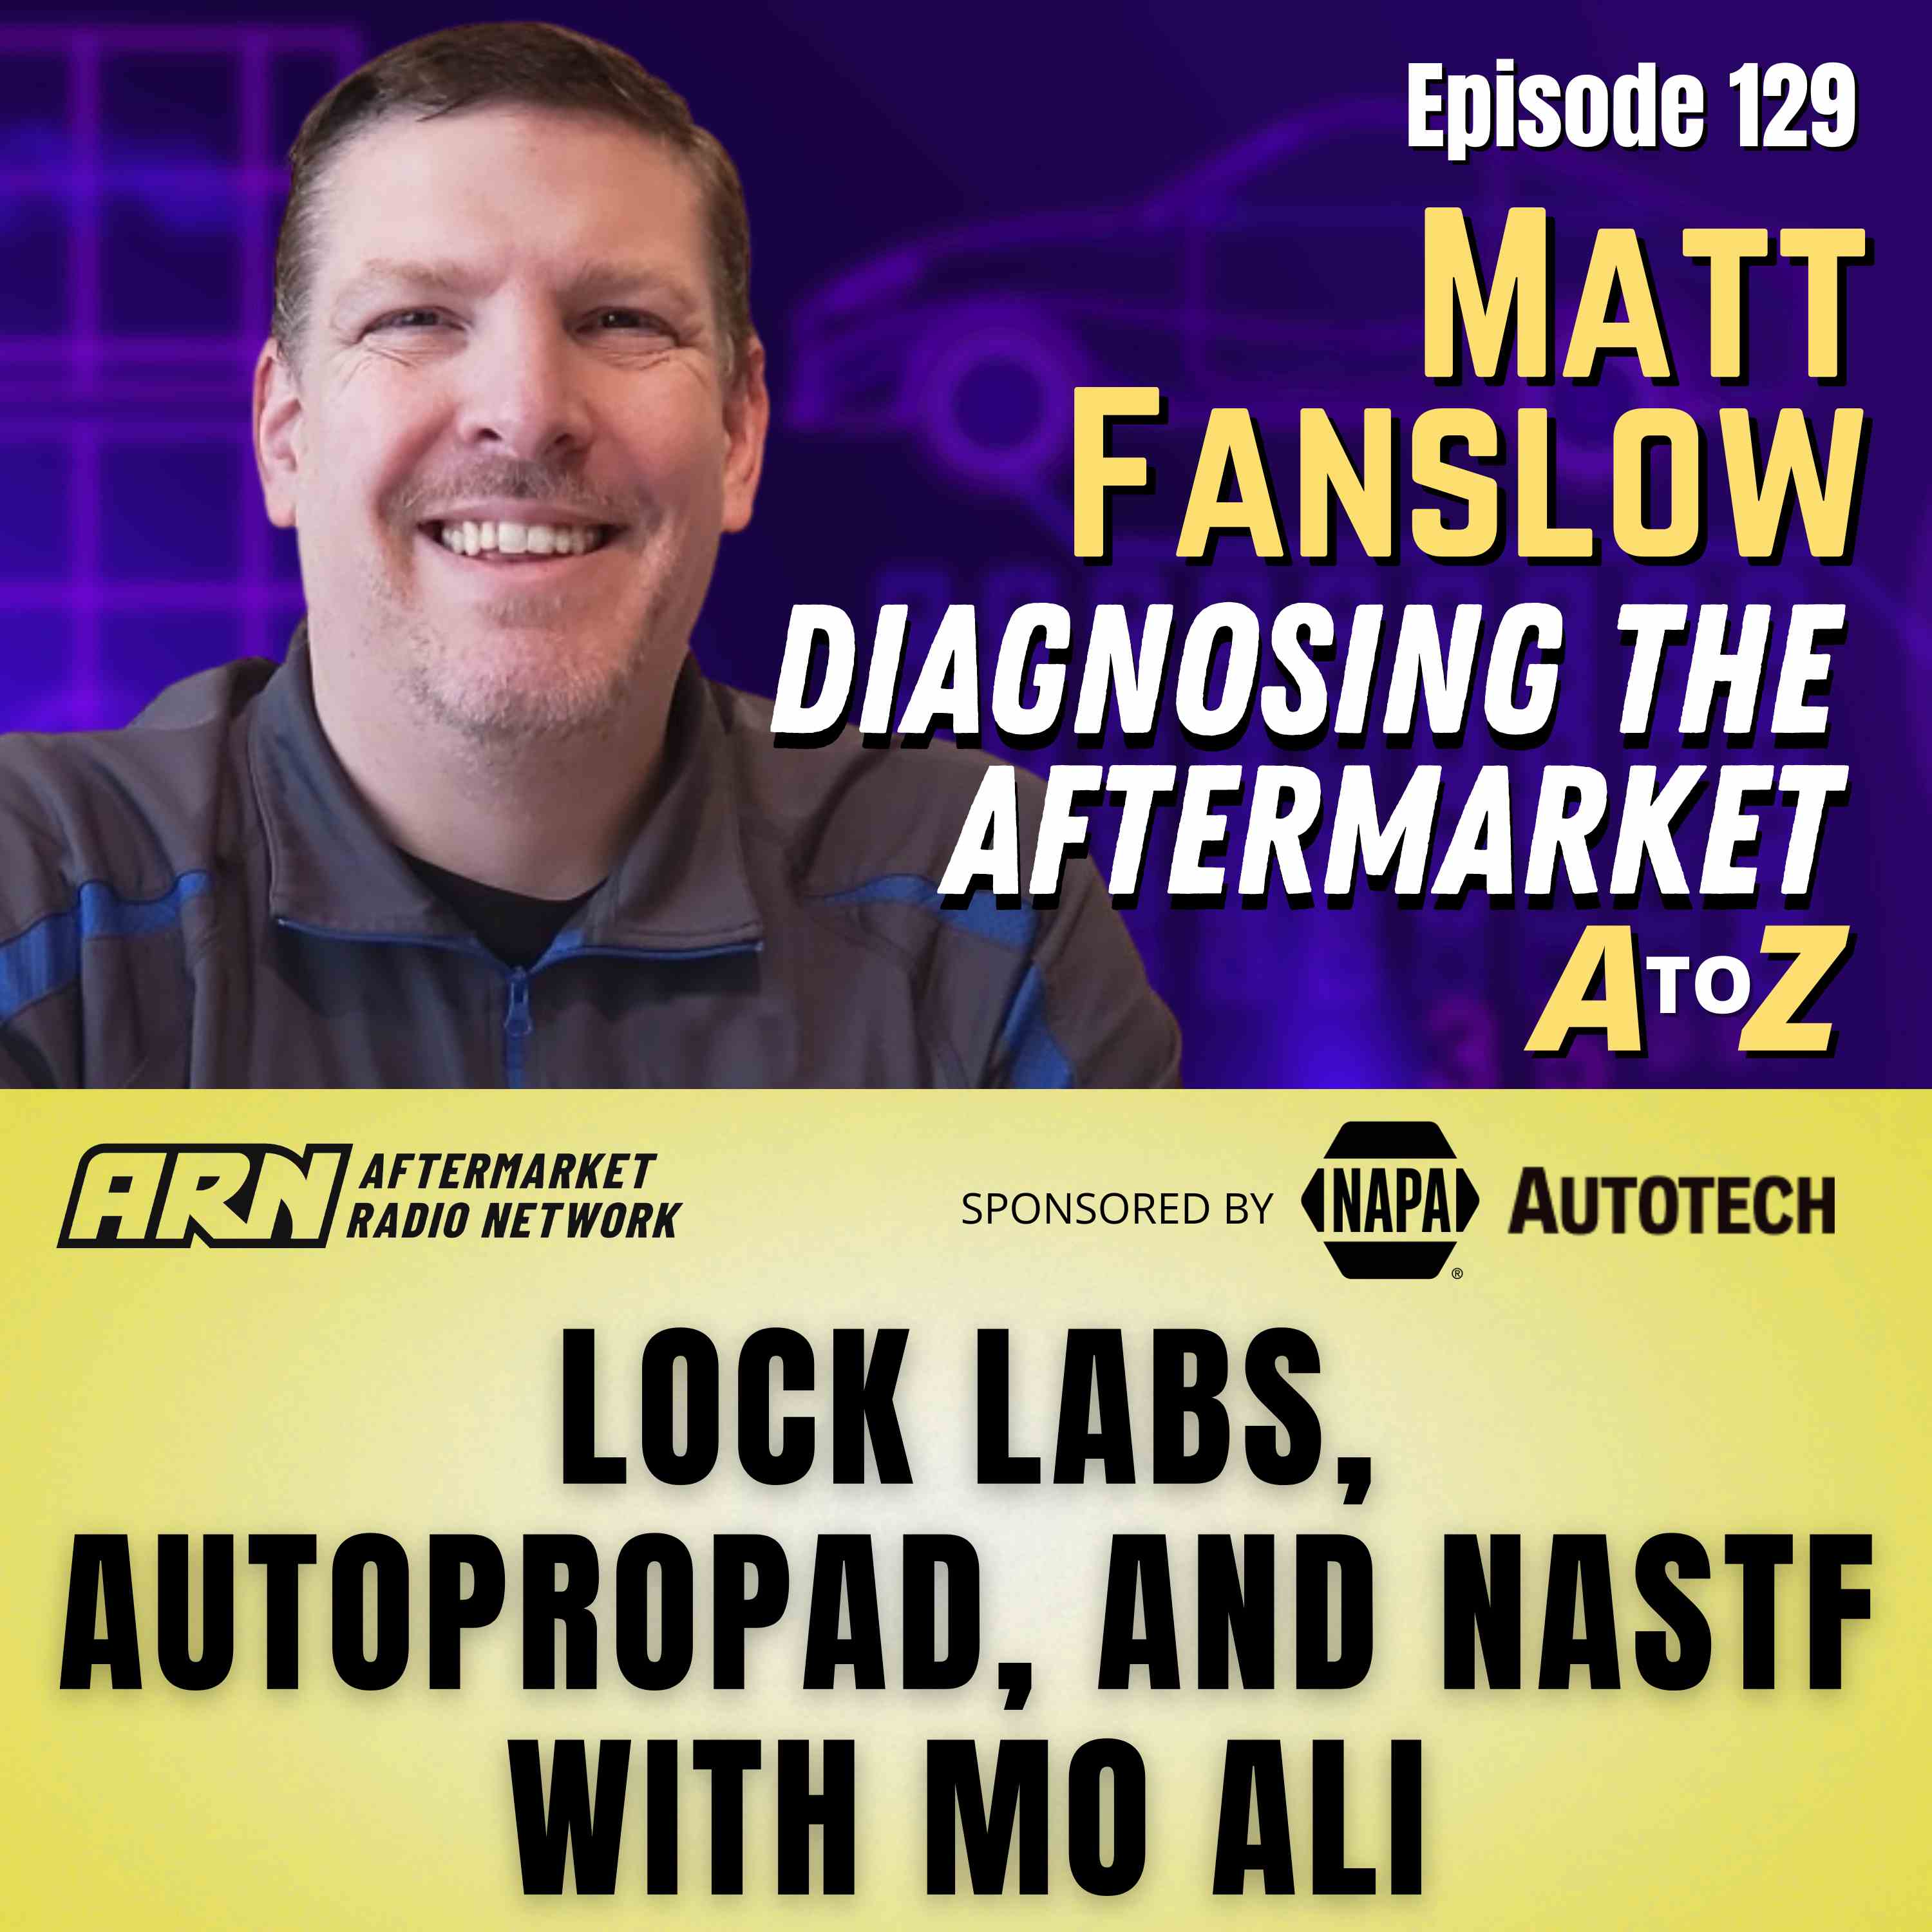 Lock Labs, AutoProPad, and NASTF with Mo Ali [E129] - Diagnosing the Aftermarket A to Z